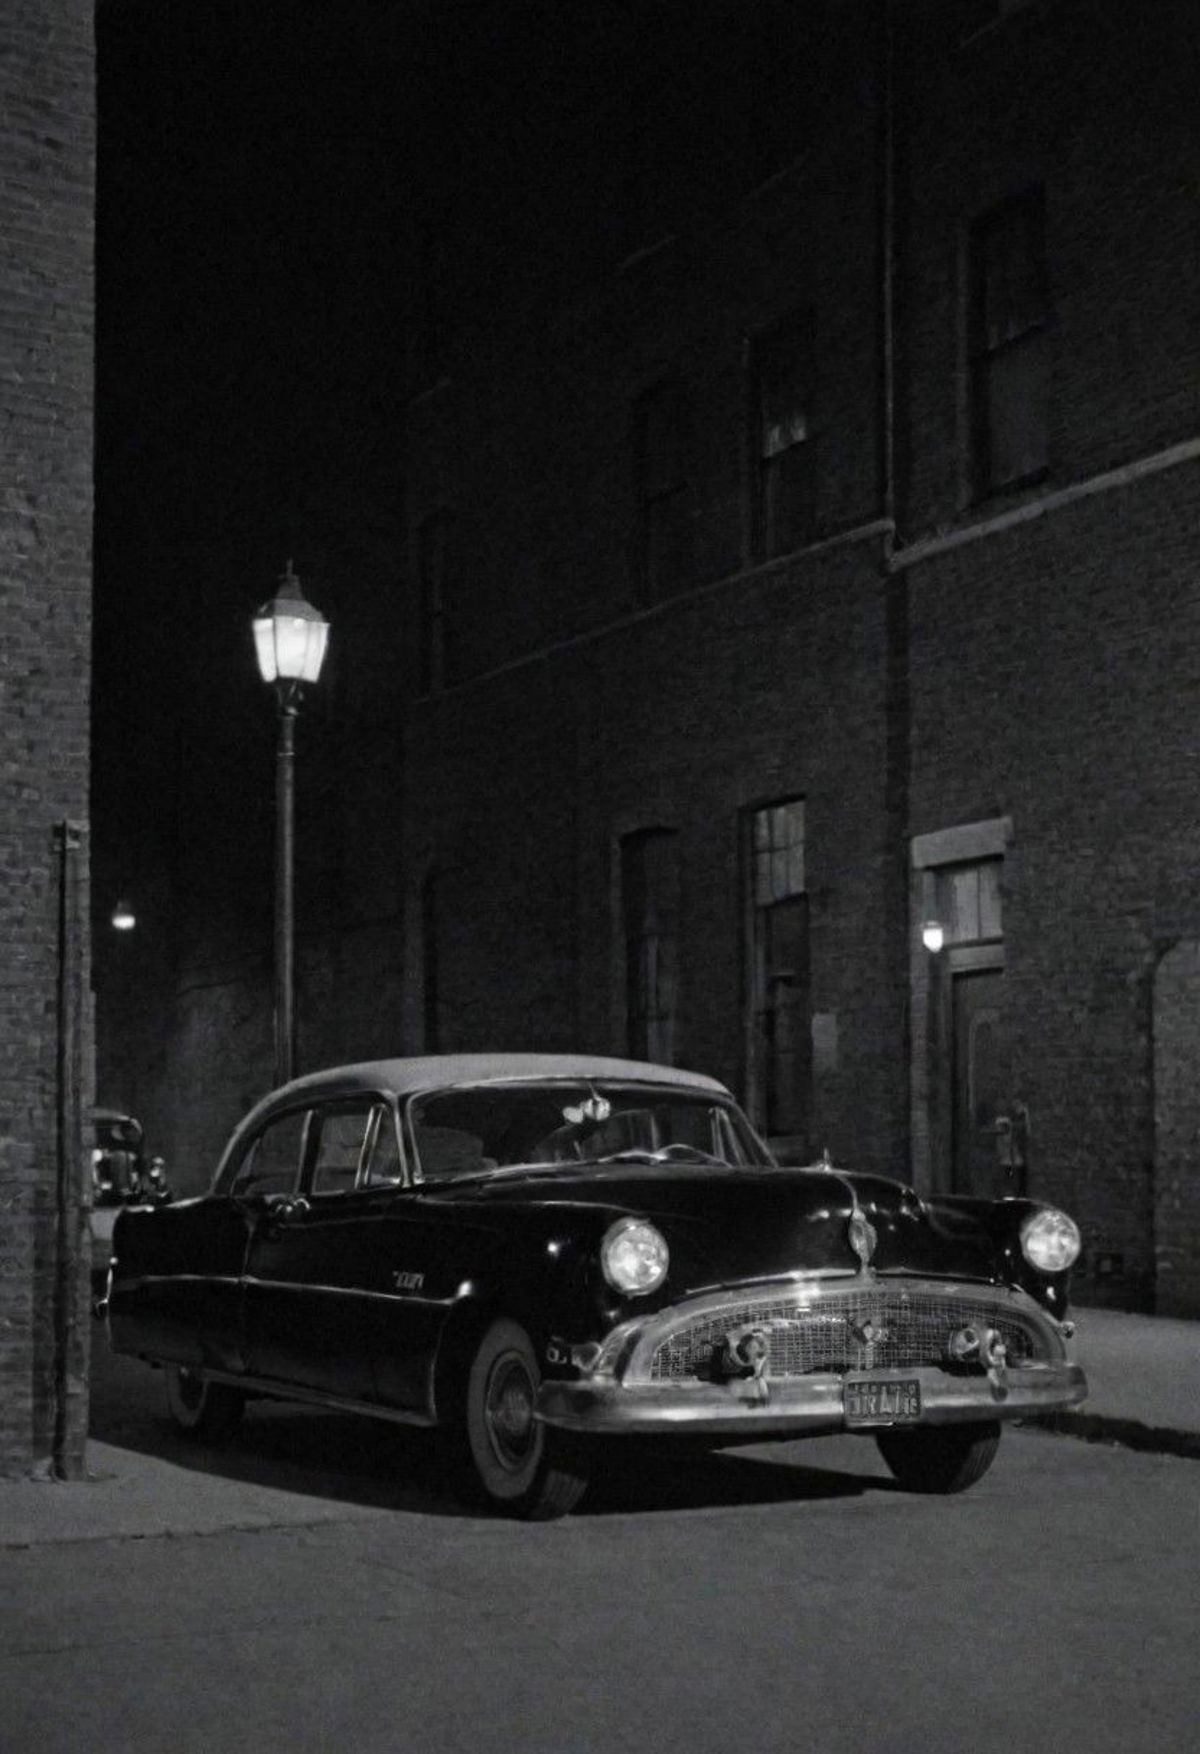 A classic black car parked on a street at night, near a building and a light pole.